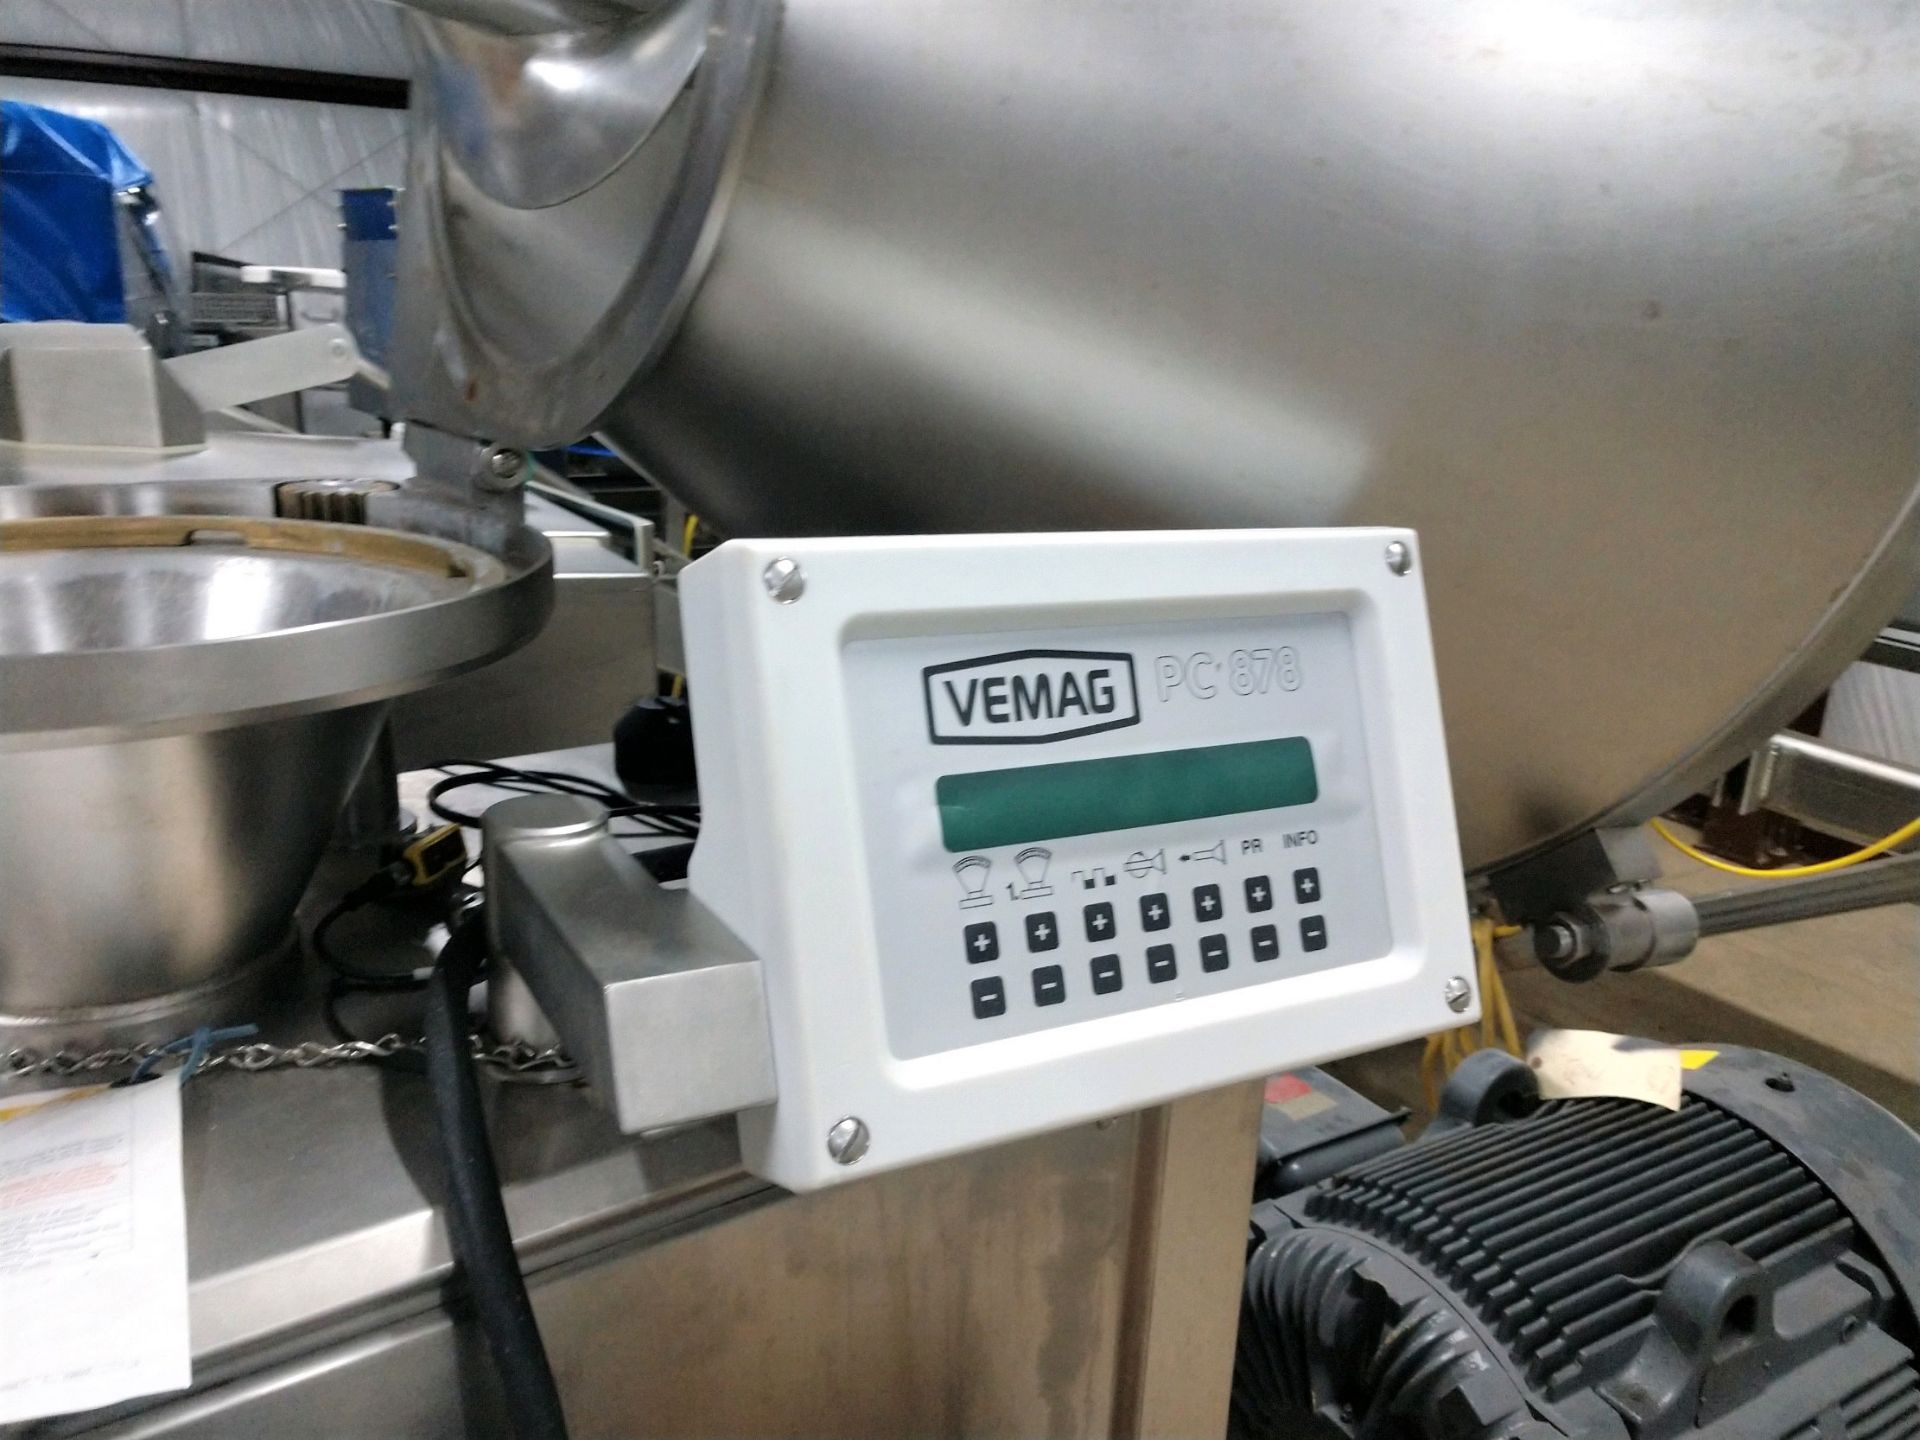 Vemag 500 Robot - Image 3 of 7